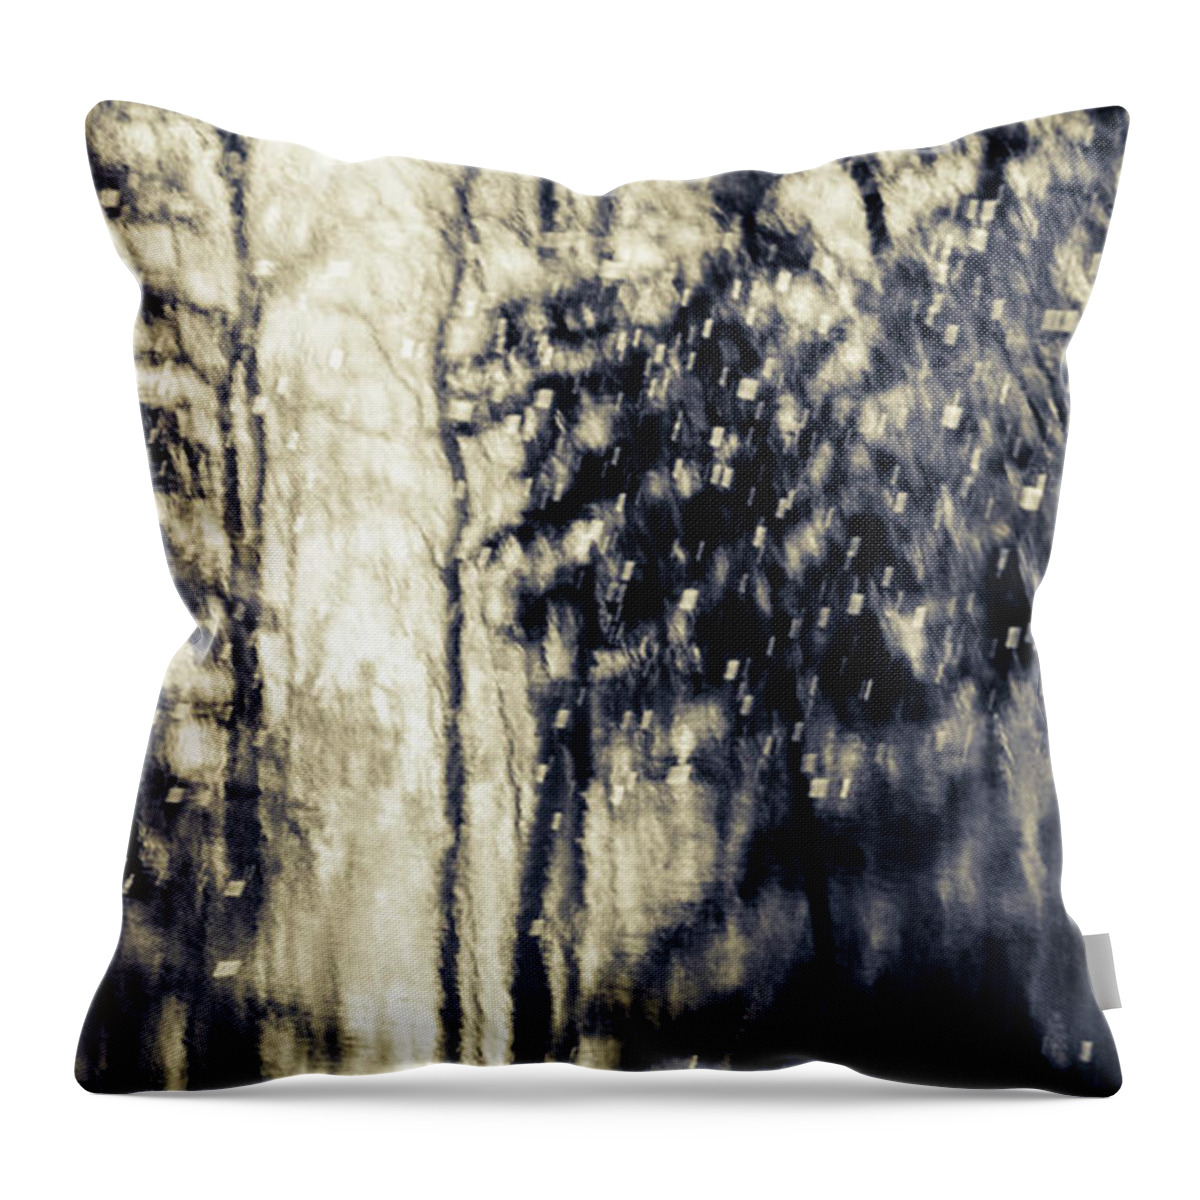 Abstract Throw Pillow featuring the photograph Winter's Forest by Lori Dobbs